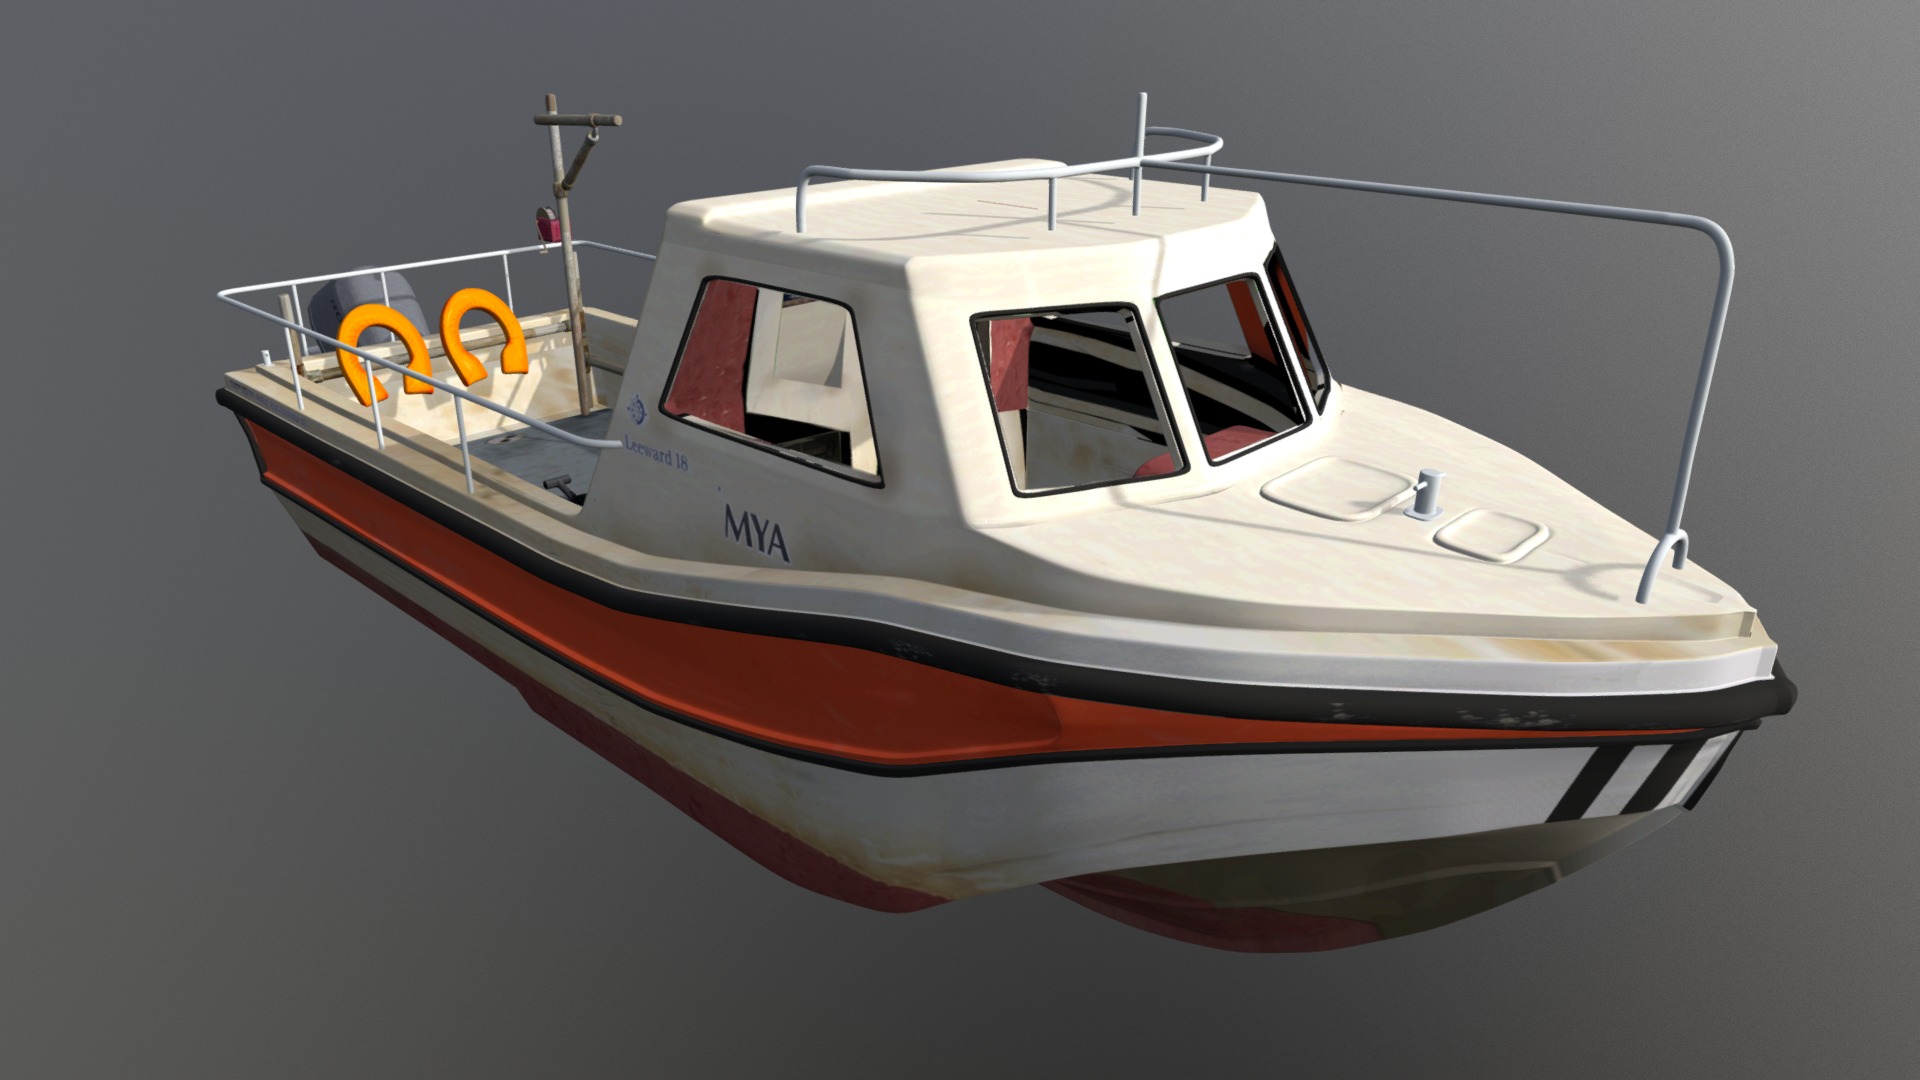 3D model The Leeward - This is a 3D model of the The Leeward. The 3D model is about a small boat on water.